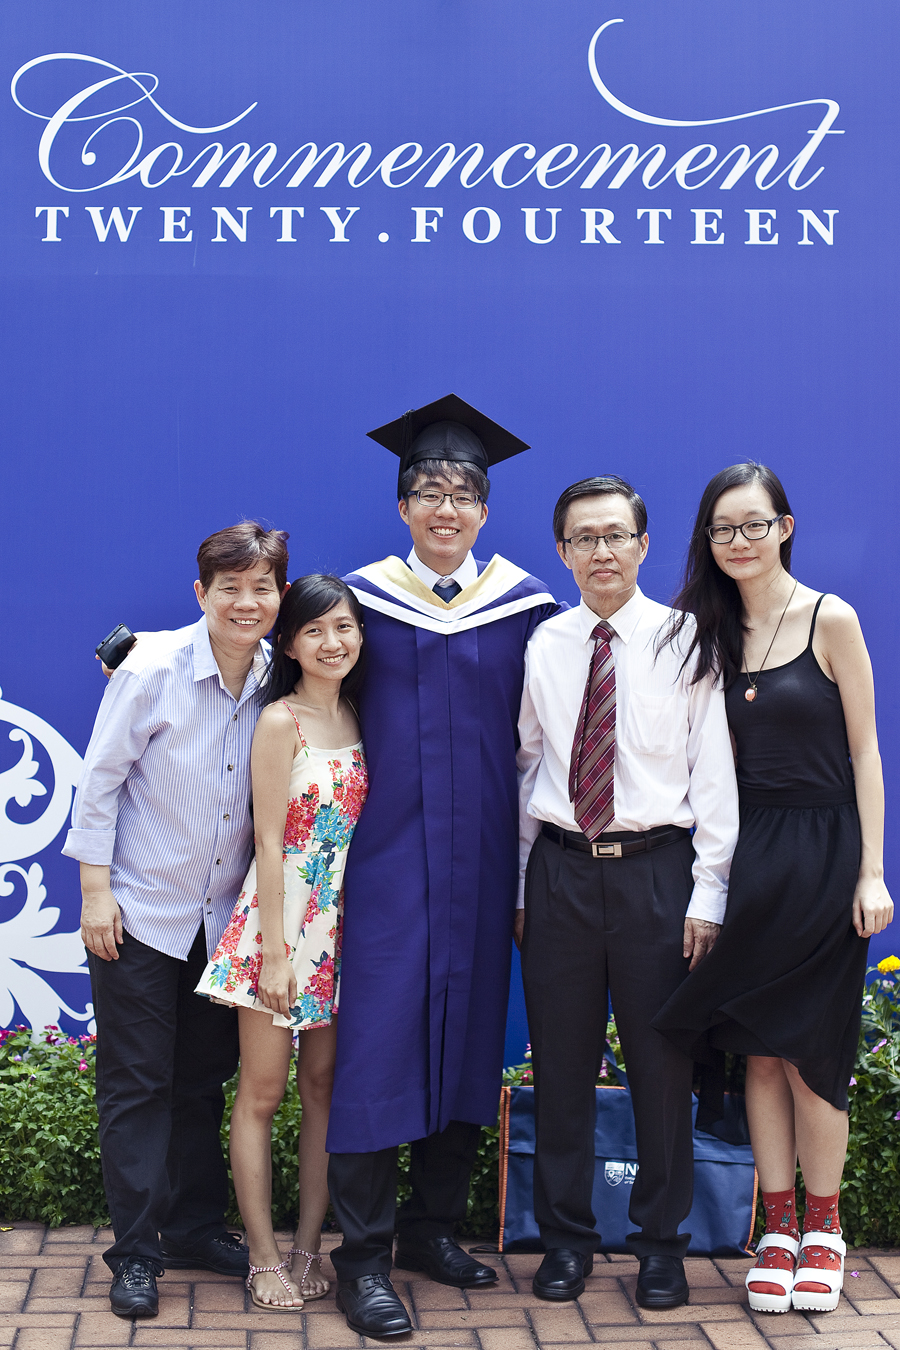 Ren and family at the NUS Commencement 2014.